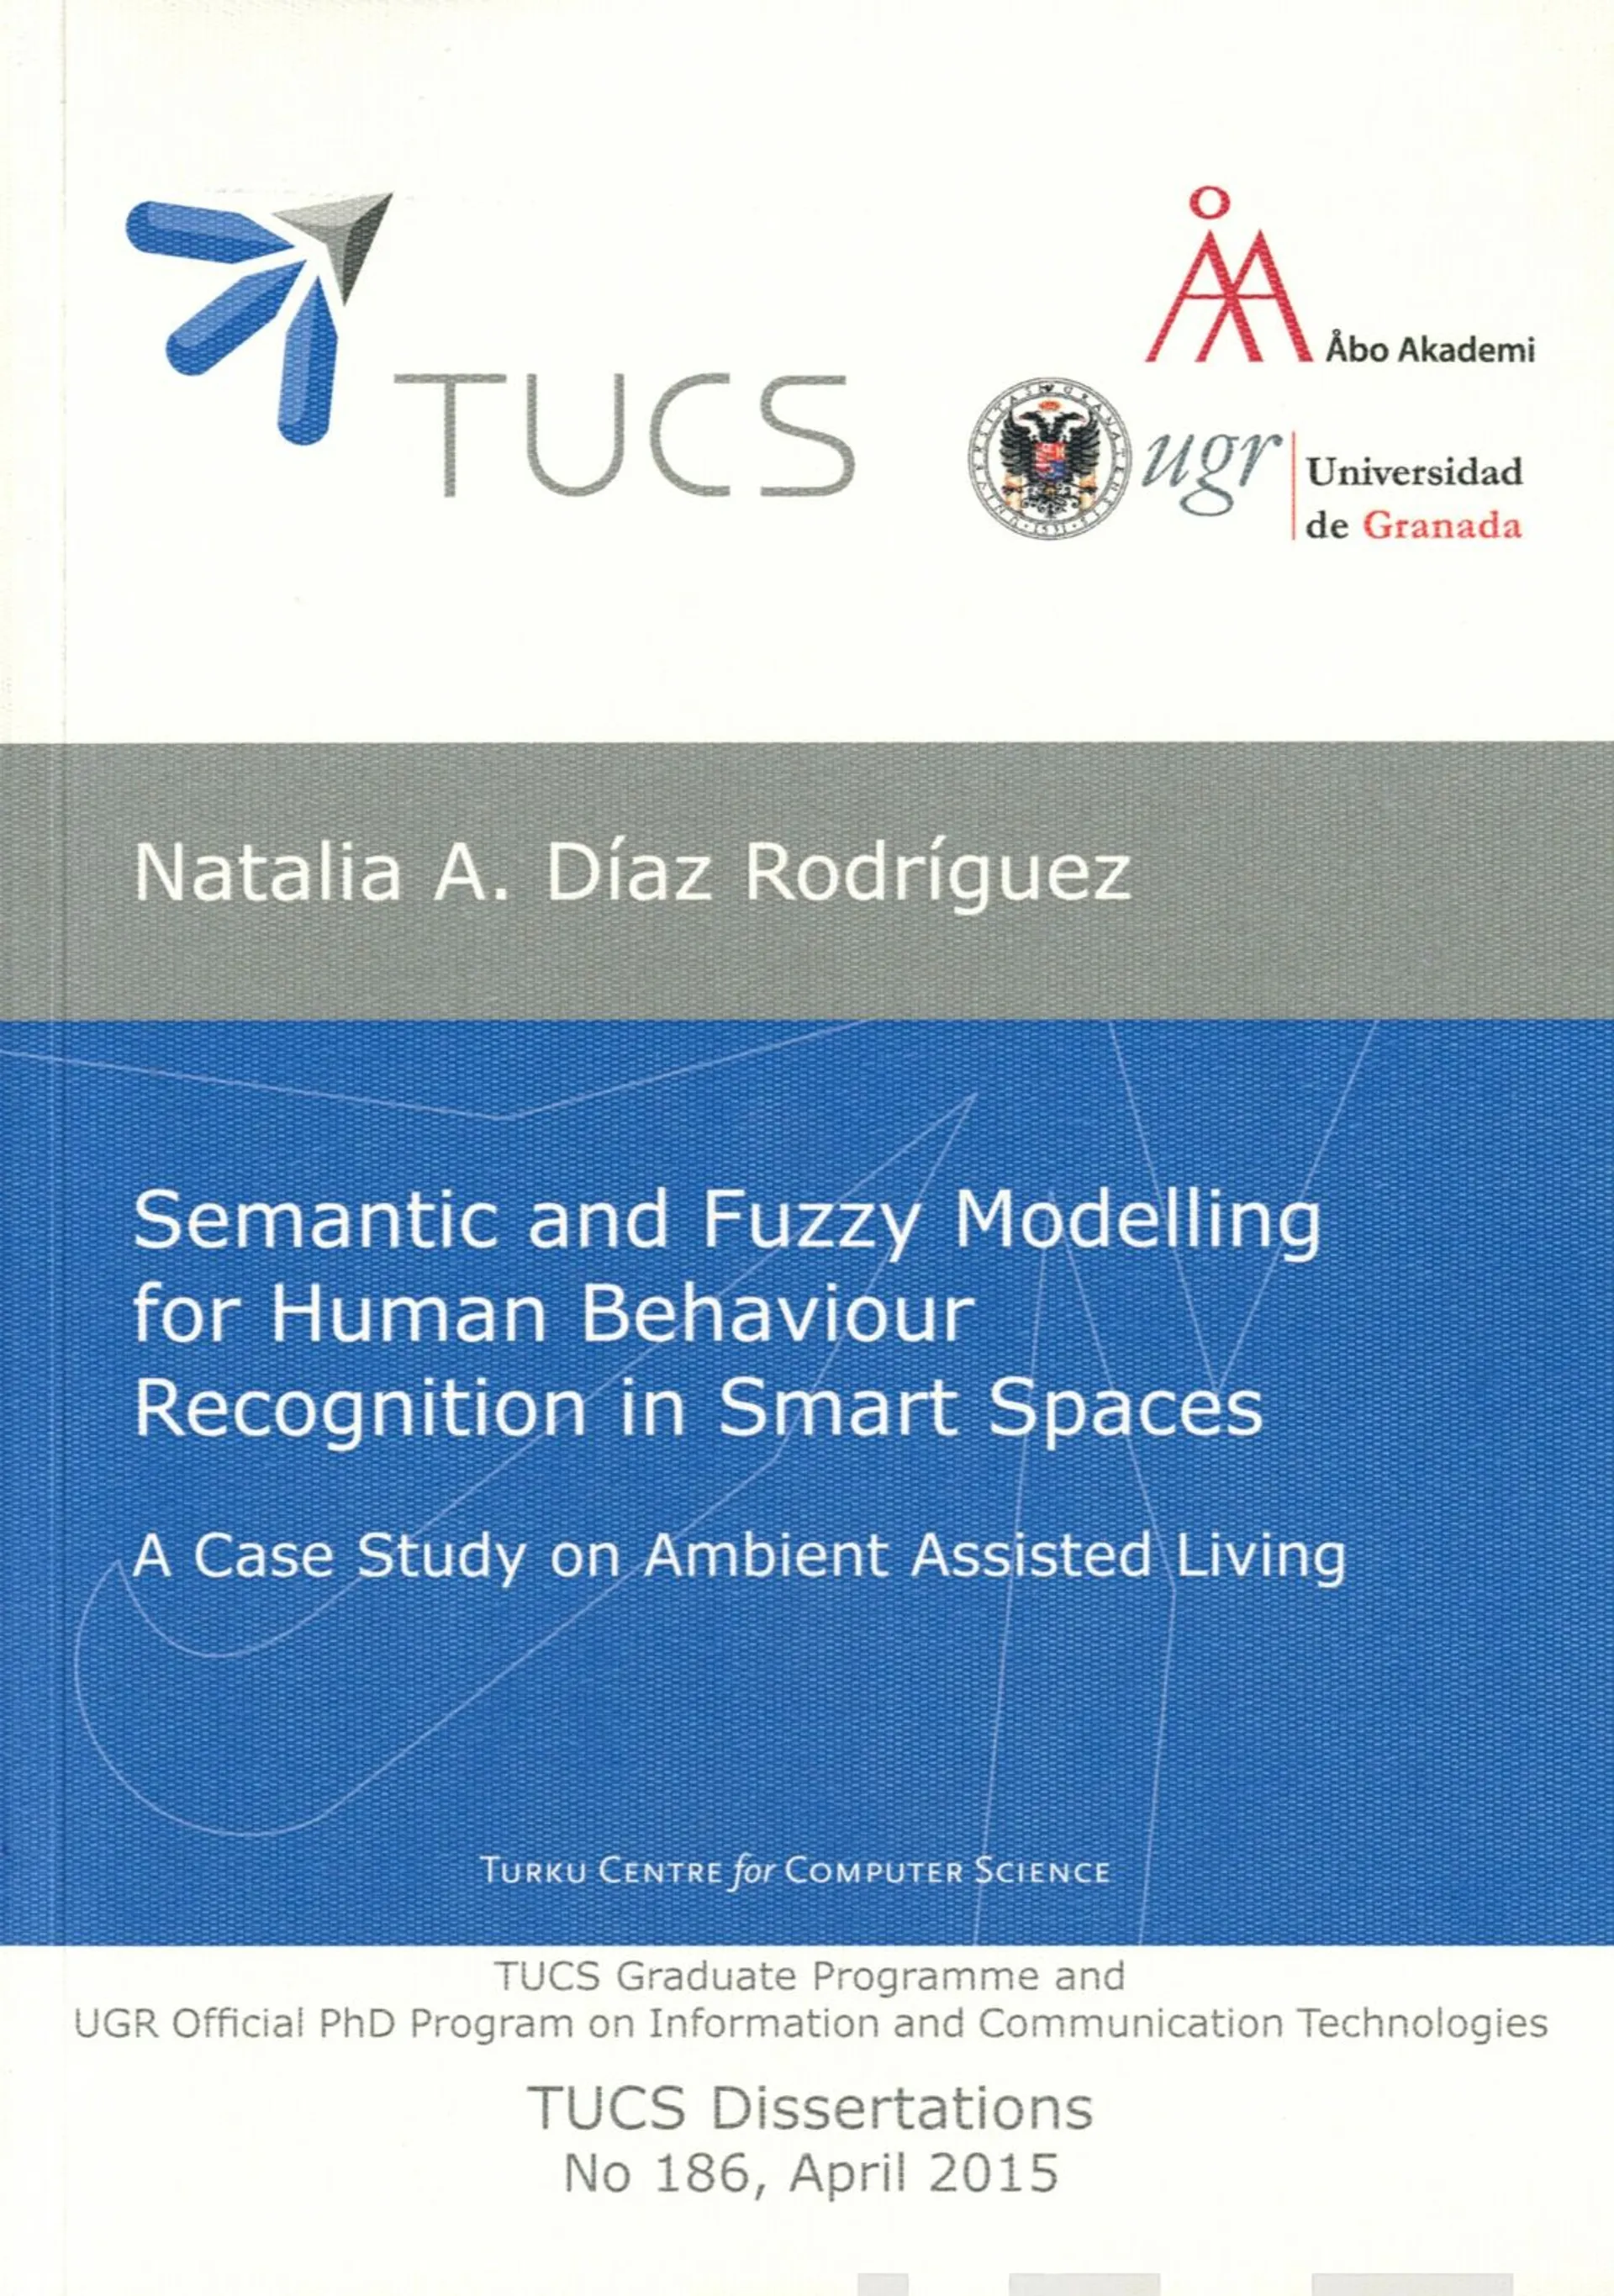 Díaz Rodríguez, Semantic and fuzzy modelling for human behaviour recognition in smart spaces